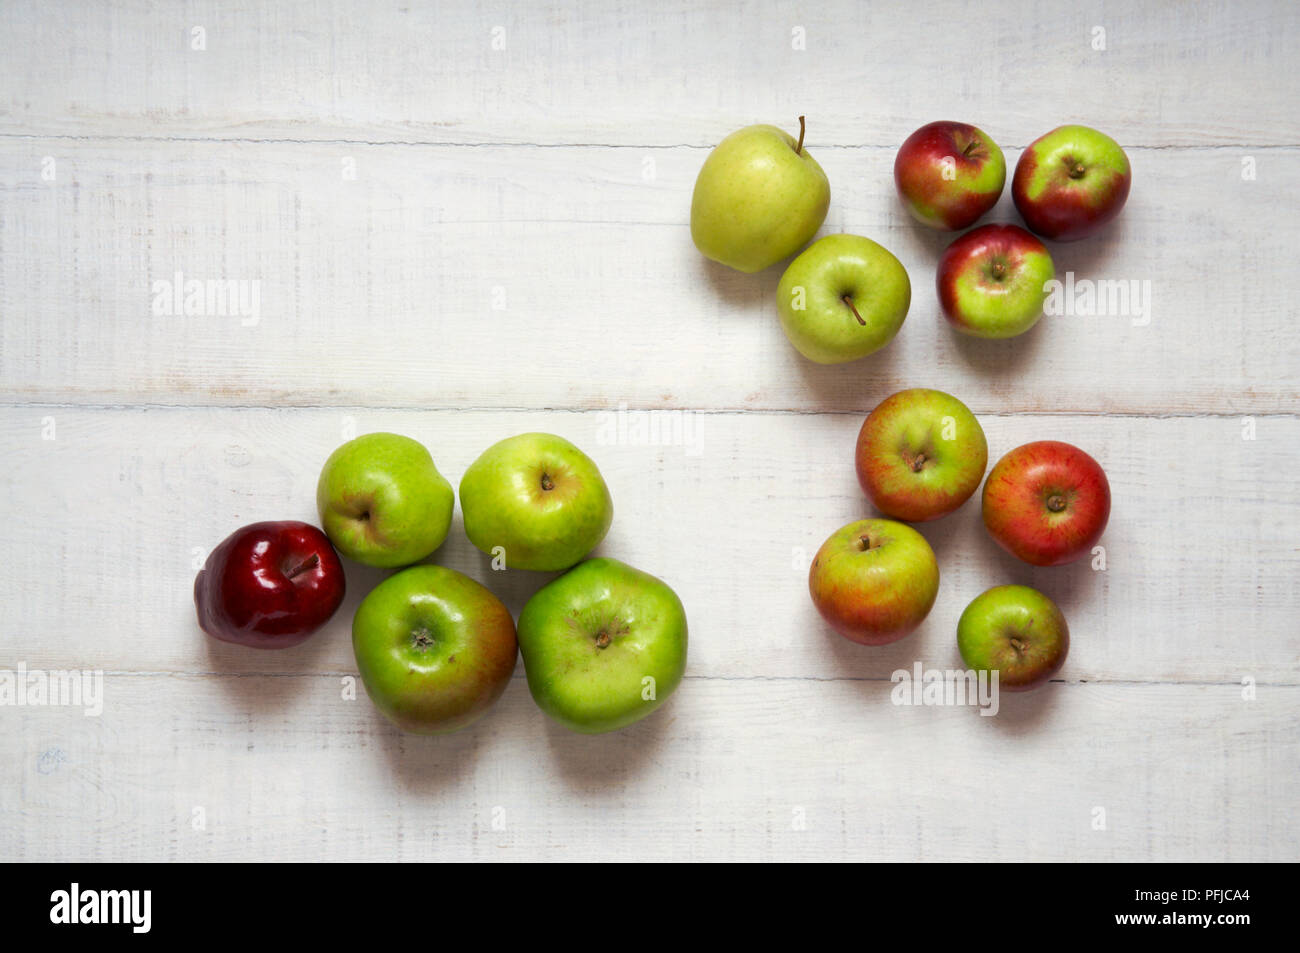 Group of apples, including Golden Delicious, Red Delicious, Bramley, Cox, Spartan, Gravenstein, view from above Stock Photo